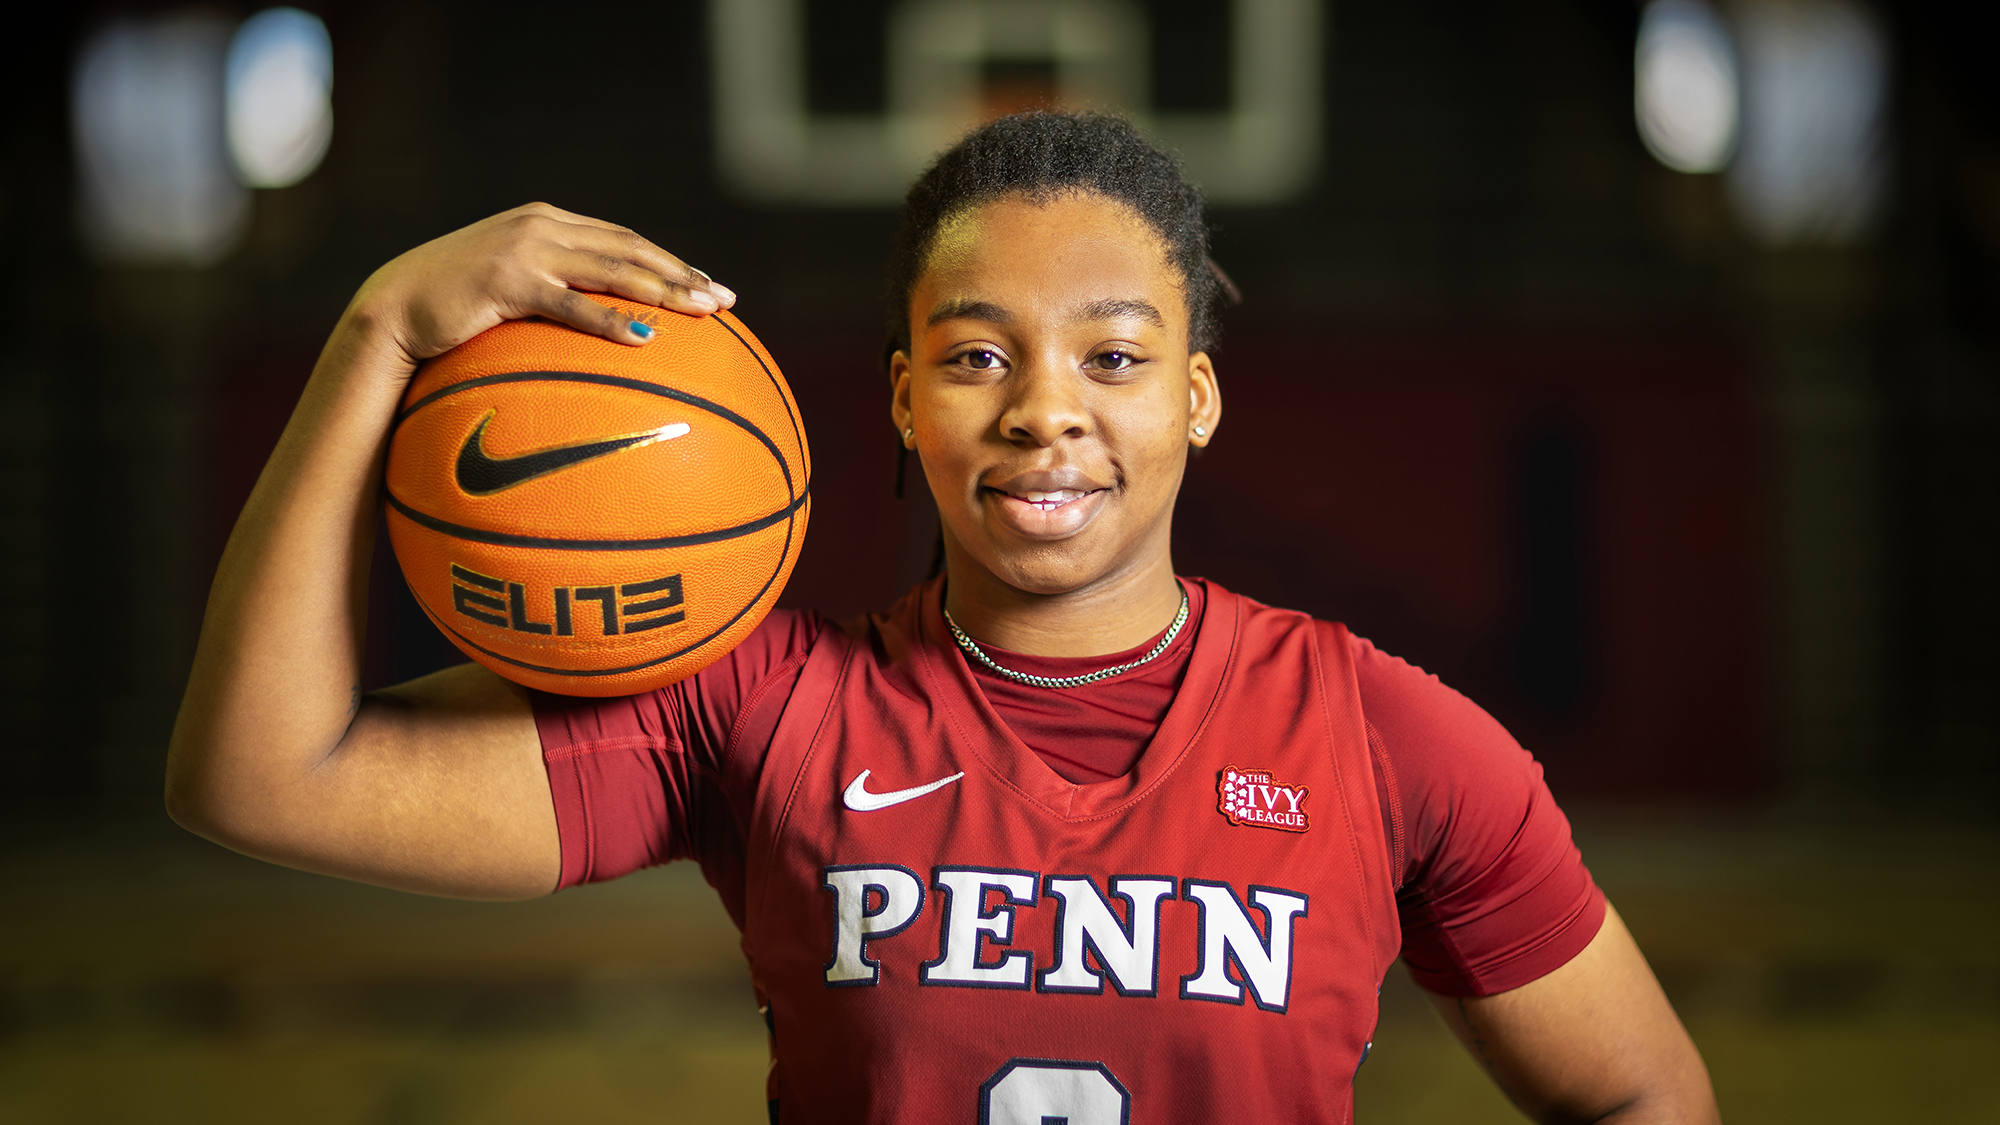 Jordan Obi poses with a ball on her right shoulder.